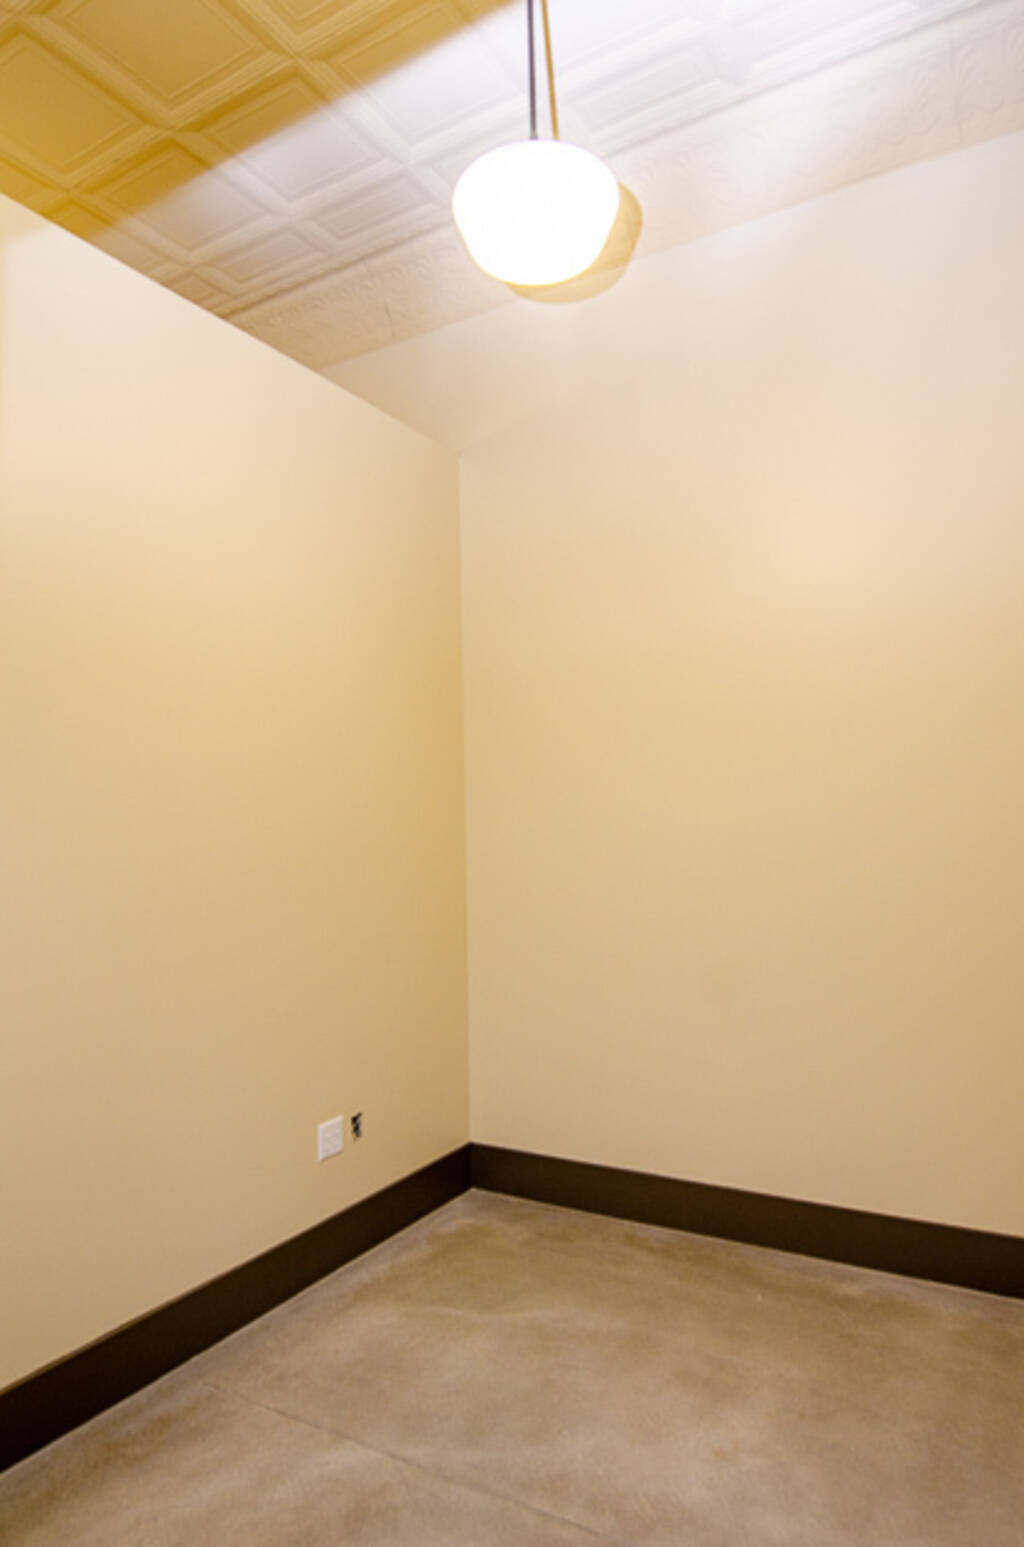 Suite B View of Ceiling and Light fixture for Office 1